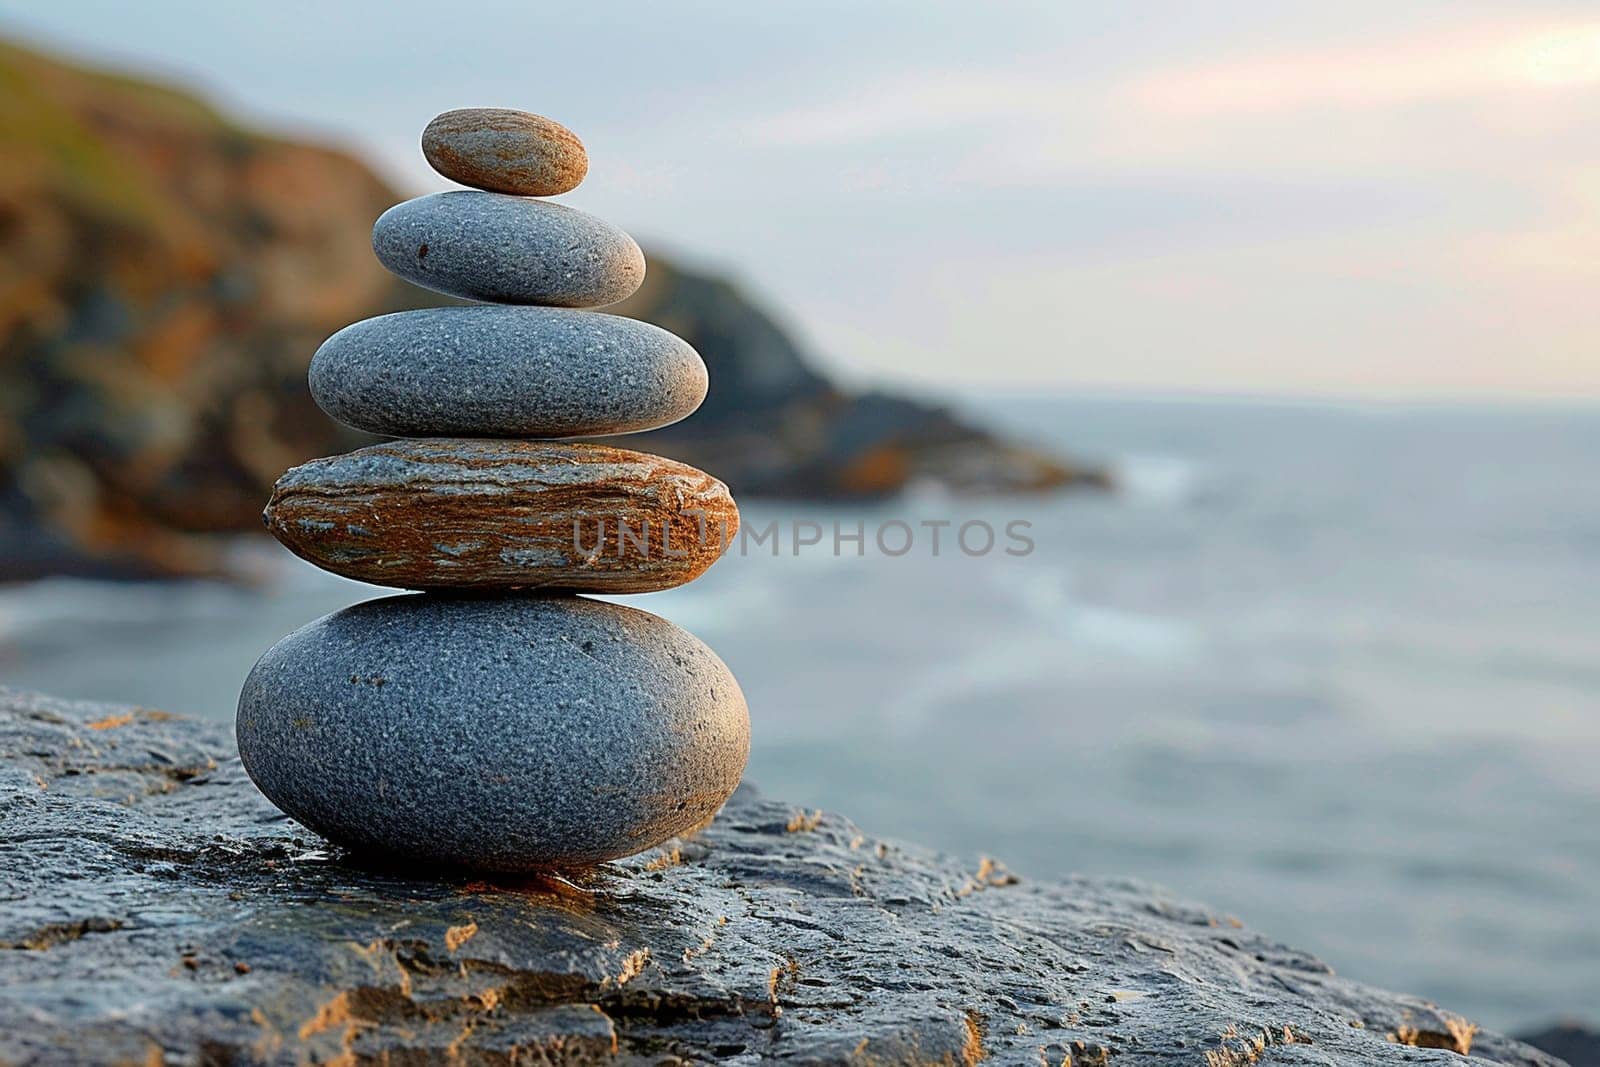 Zen Stones Stacked in Balanced Harmony, The stones blur into one another, creating a tranquil symbol of simplicity and meditation.